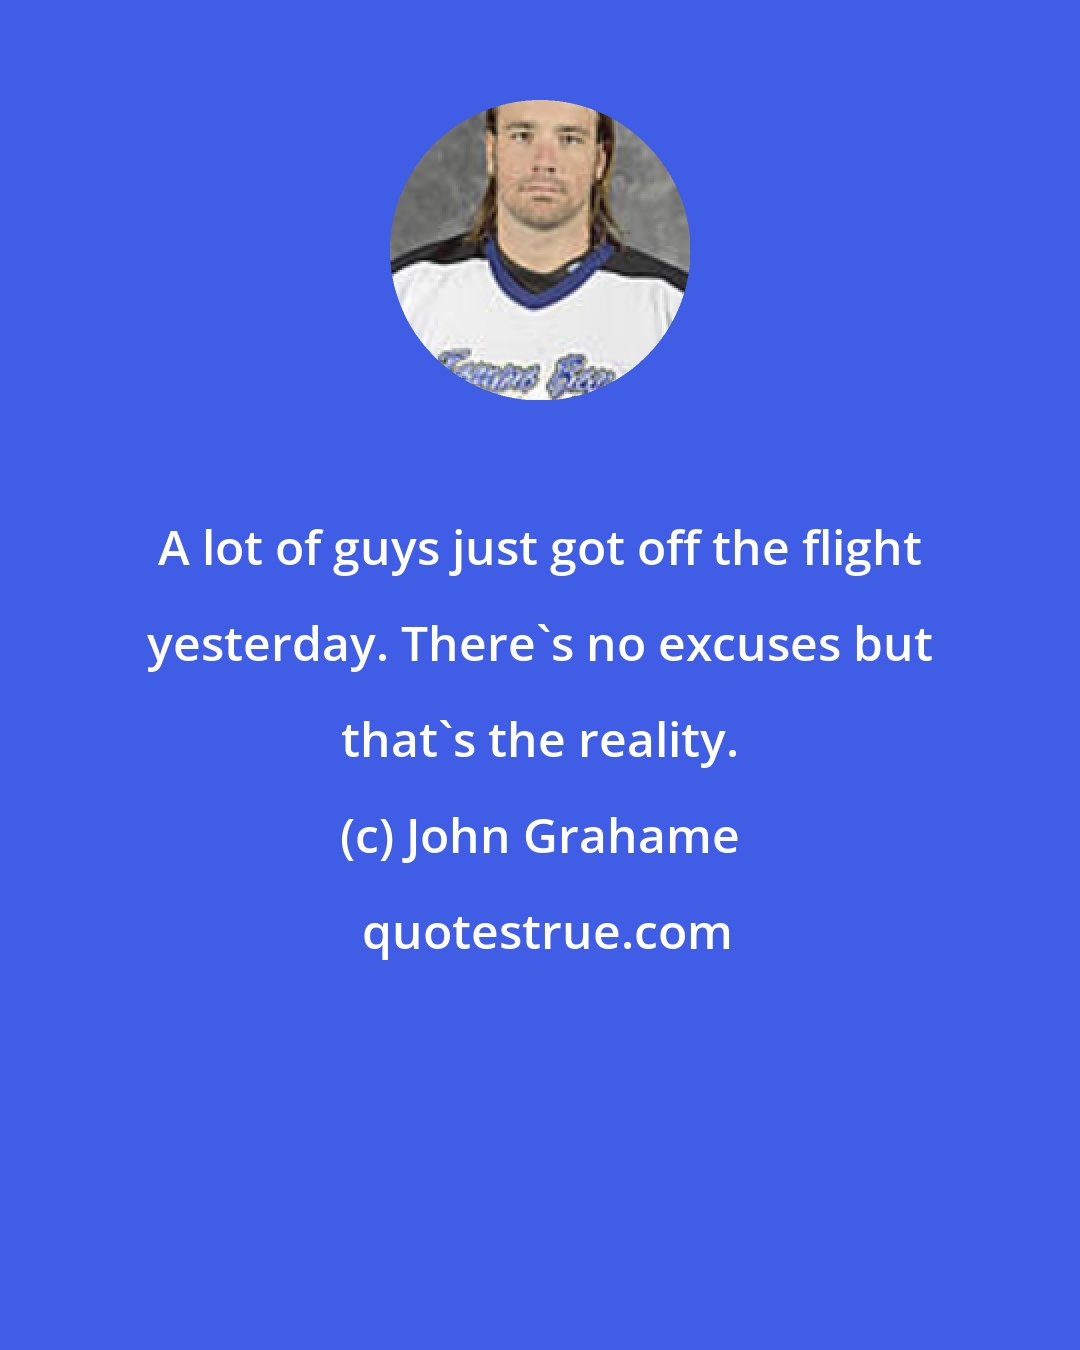 John Grahame: A lot of guys just got off the flight yesterday. There's no excuses but that's the reality.